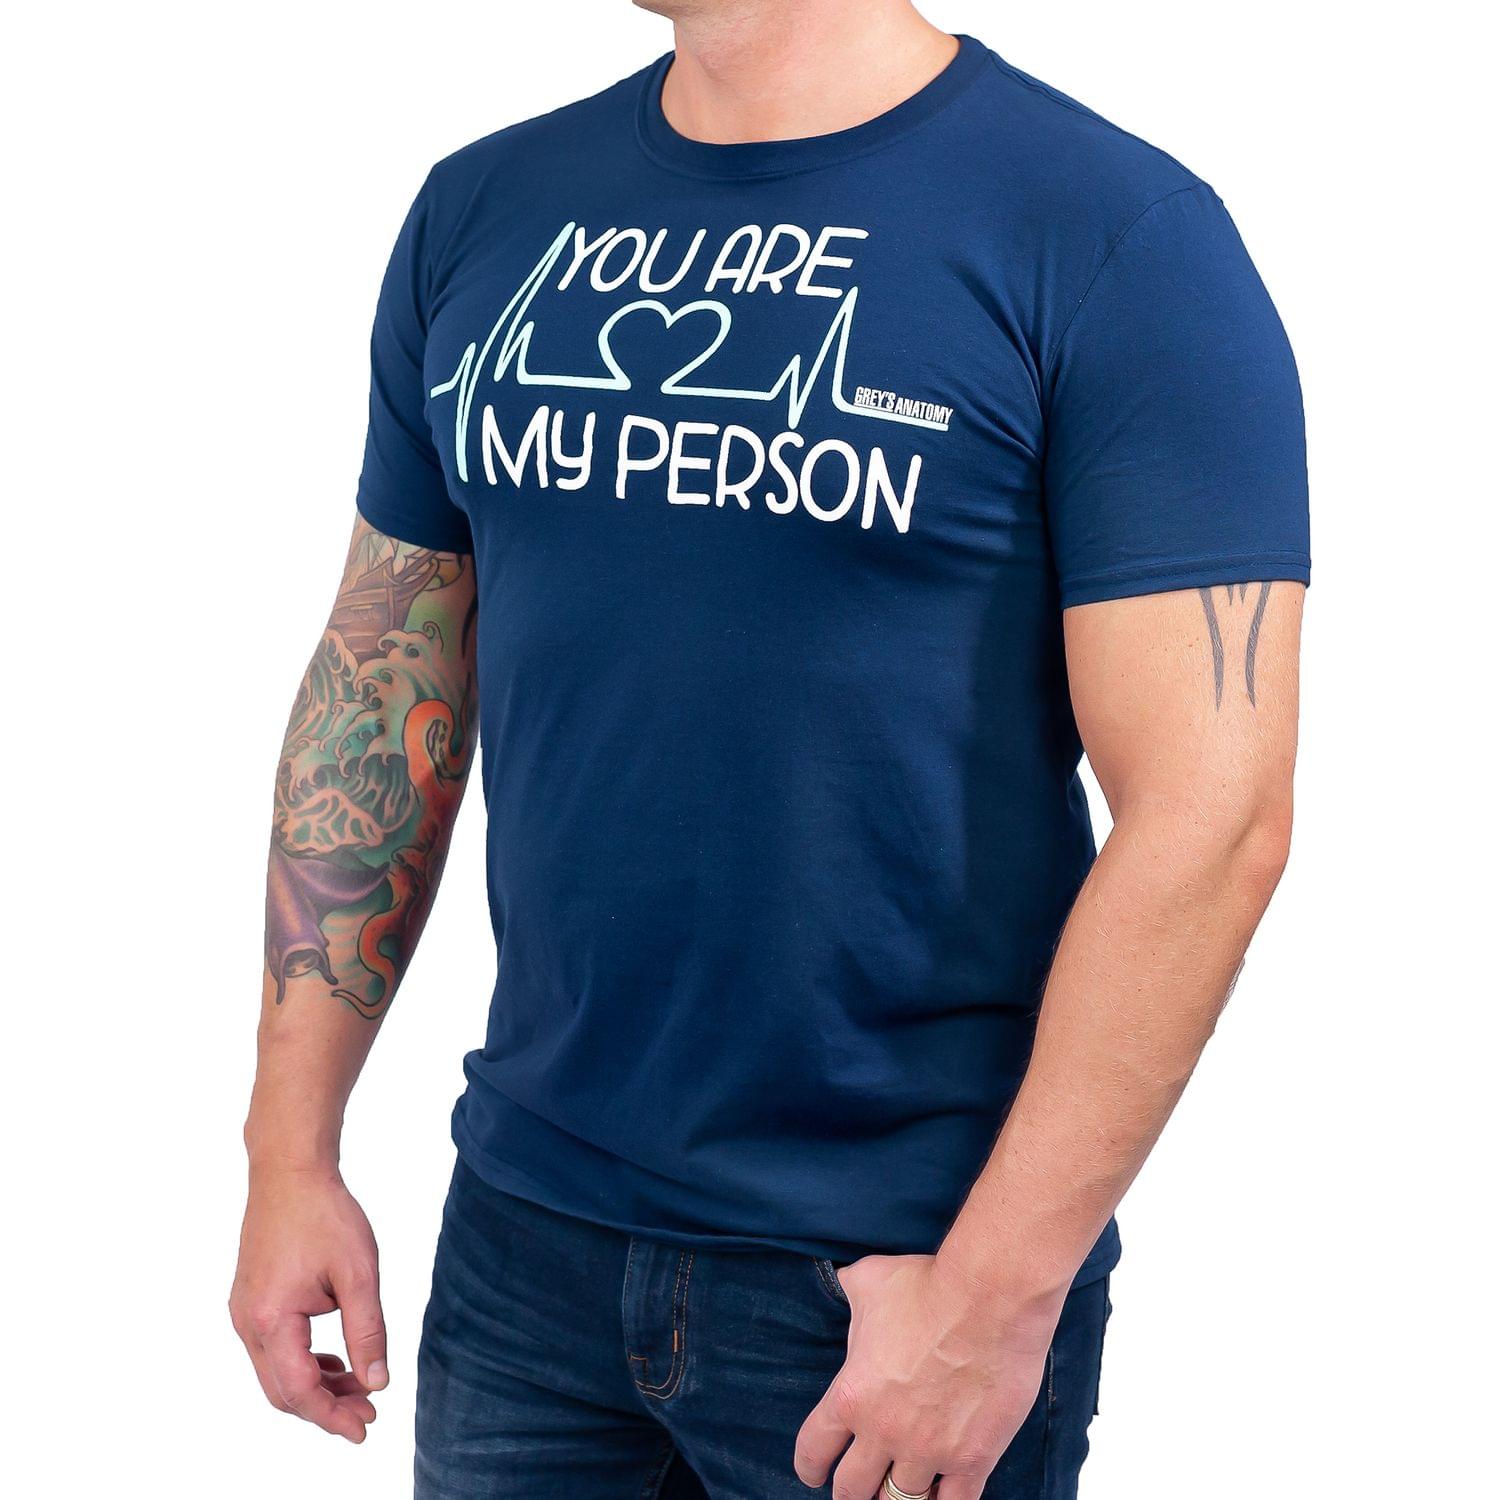 Greys Anatomy "You Are My Person" Adult Navy T-Shirt